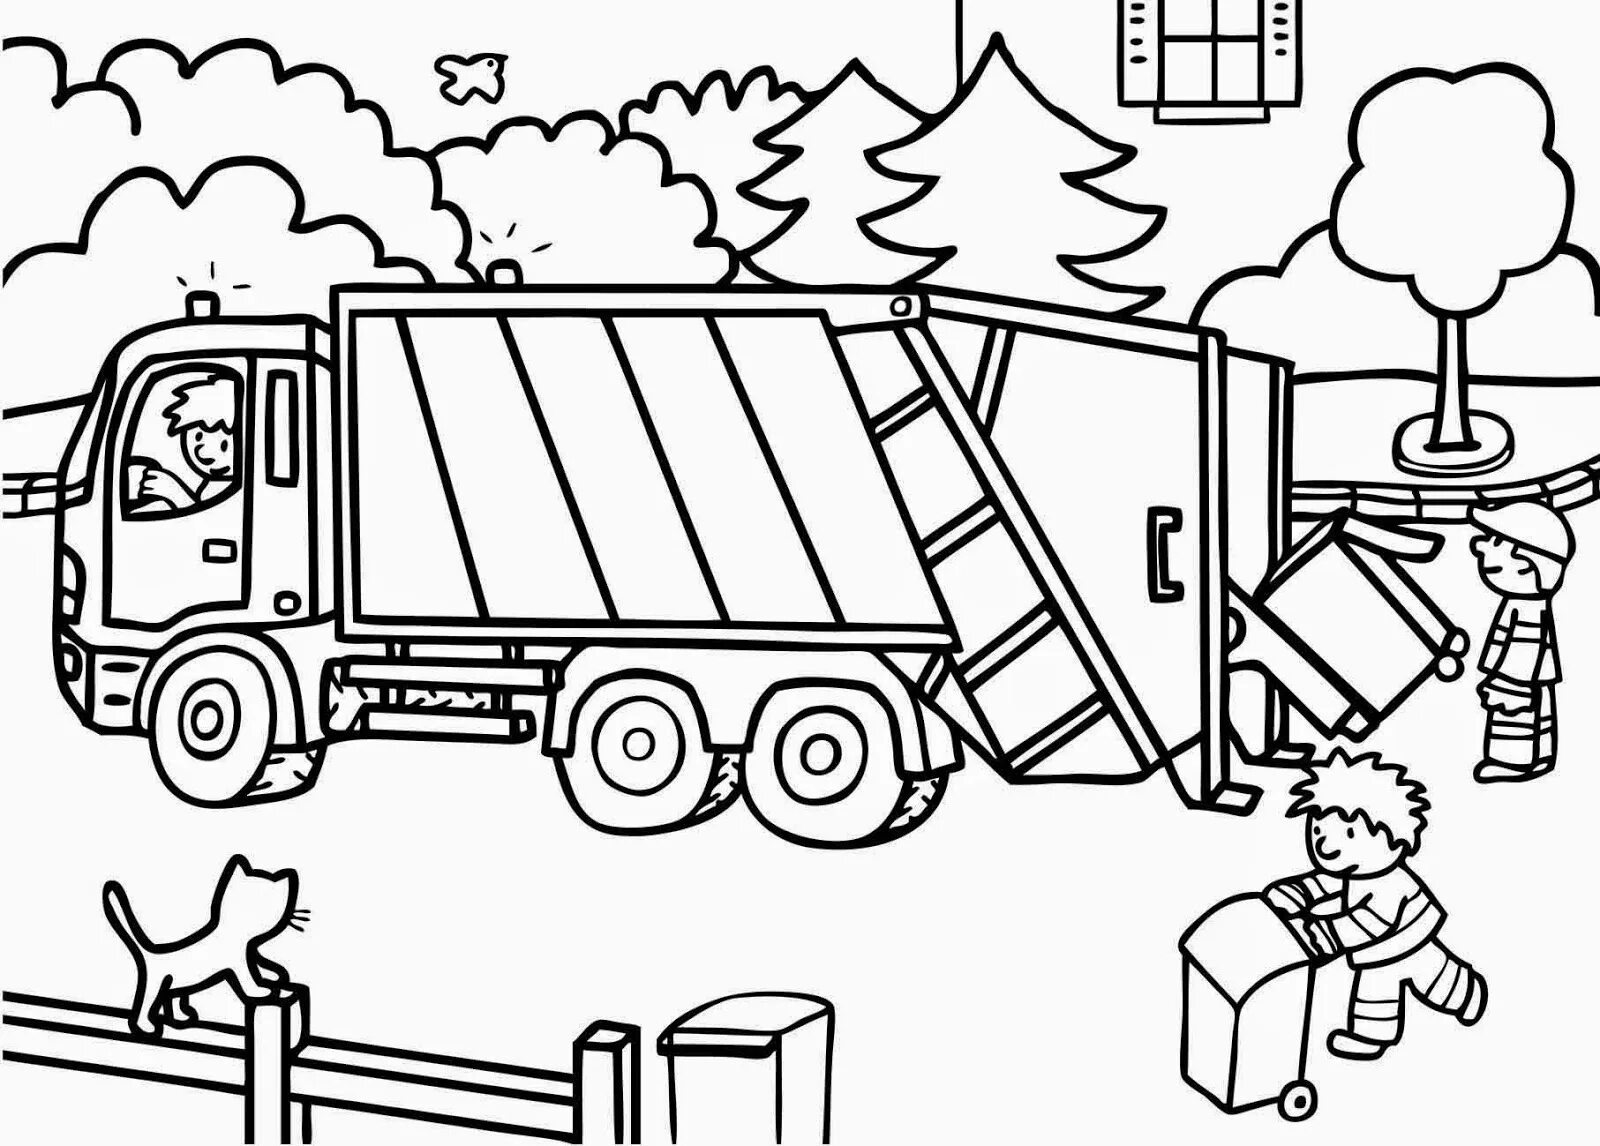 Adorable garbage truck coloring page for kids